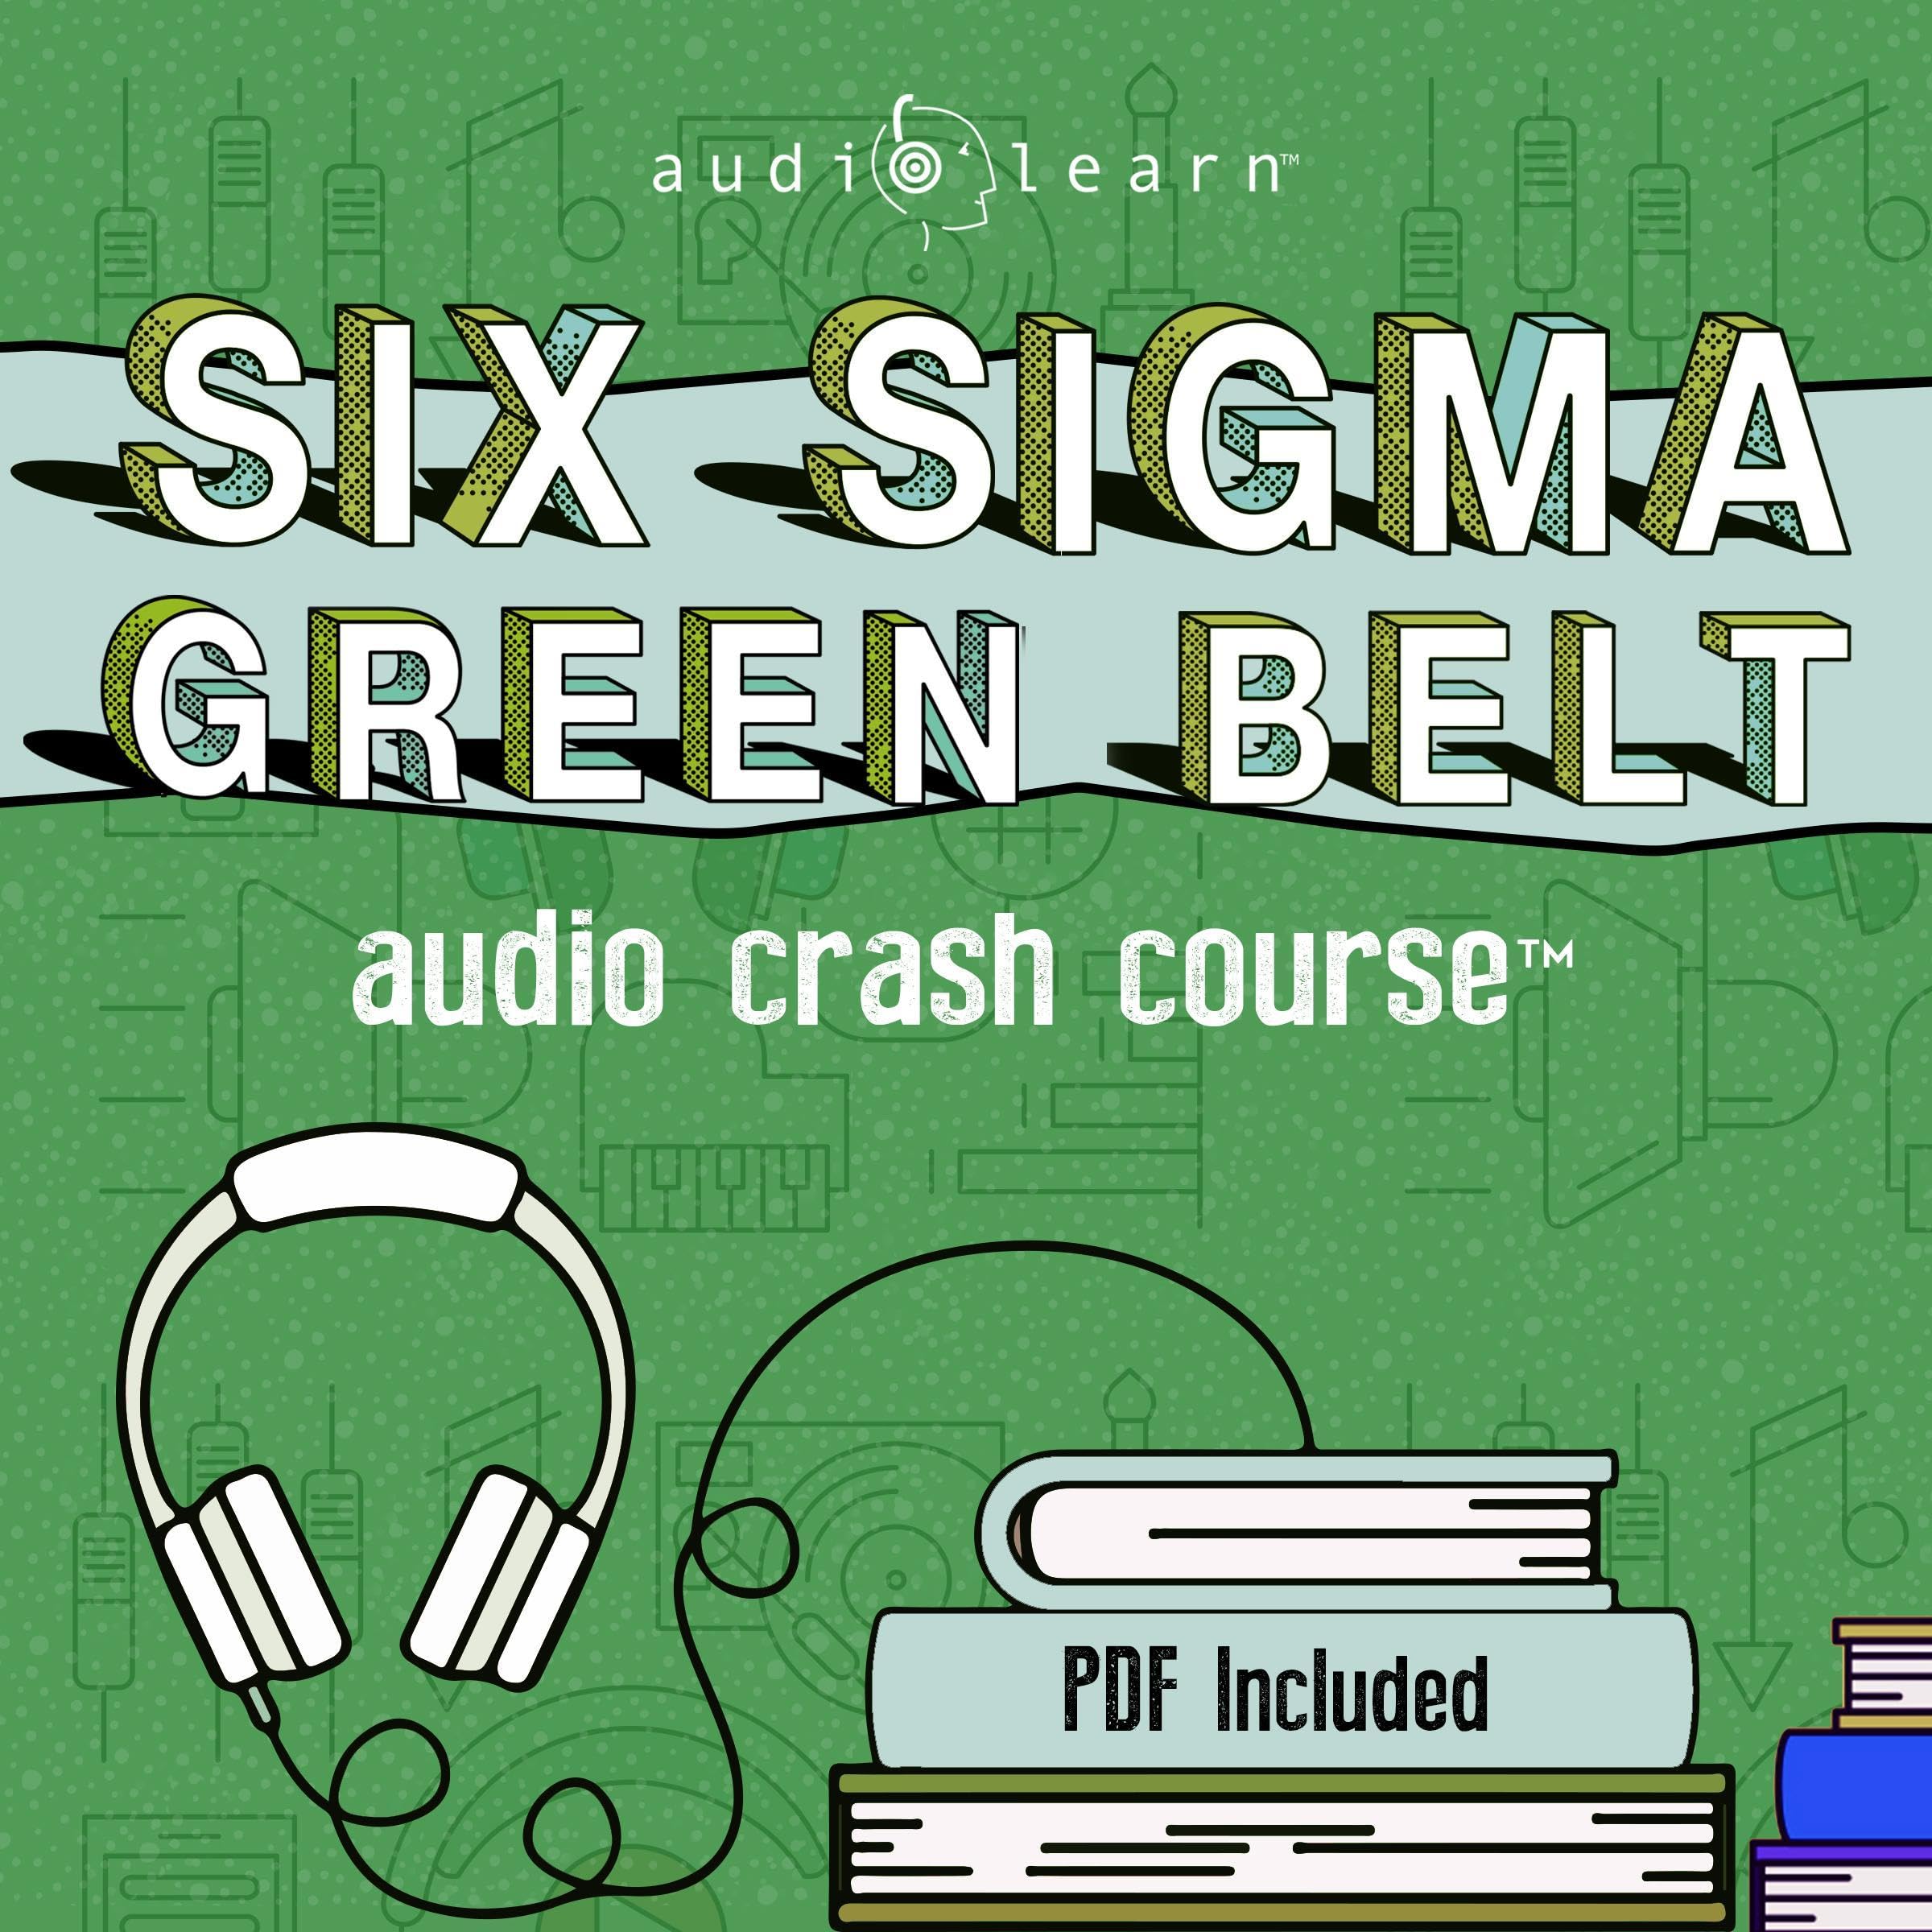 Six Sigma Green Belt Audio Crash Course: Complete Review for the Certified Six Sigma Green Belt (CSSGB) Exam!